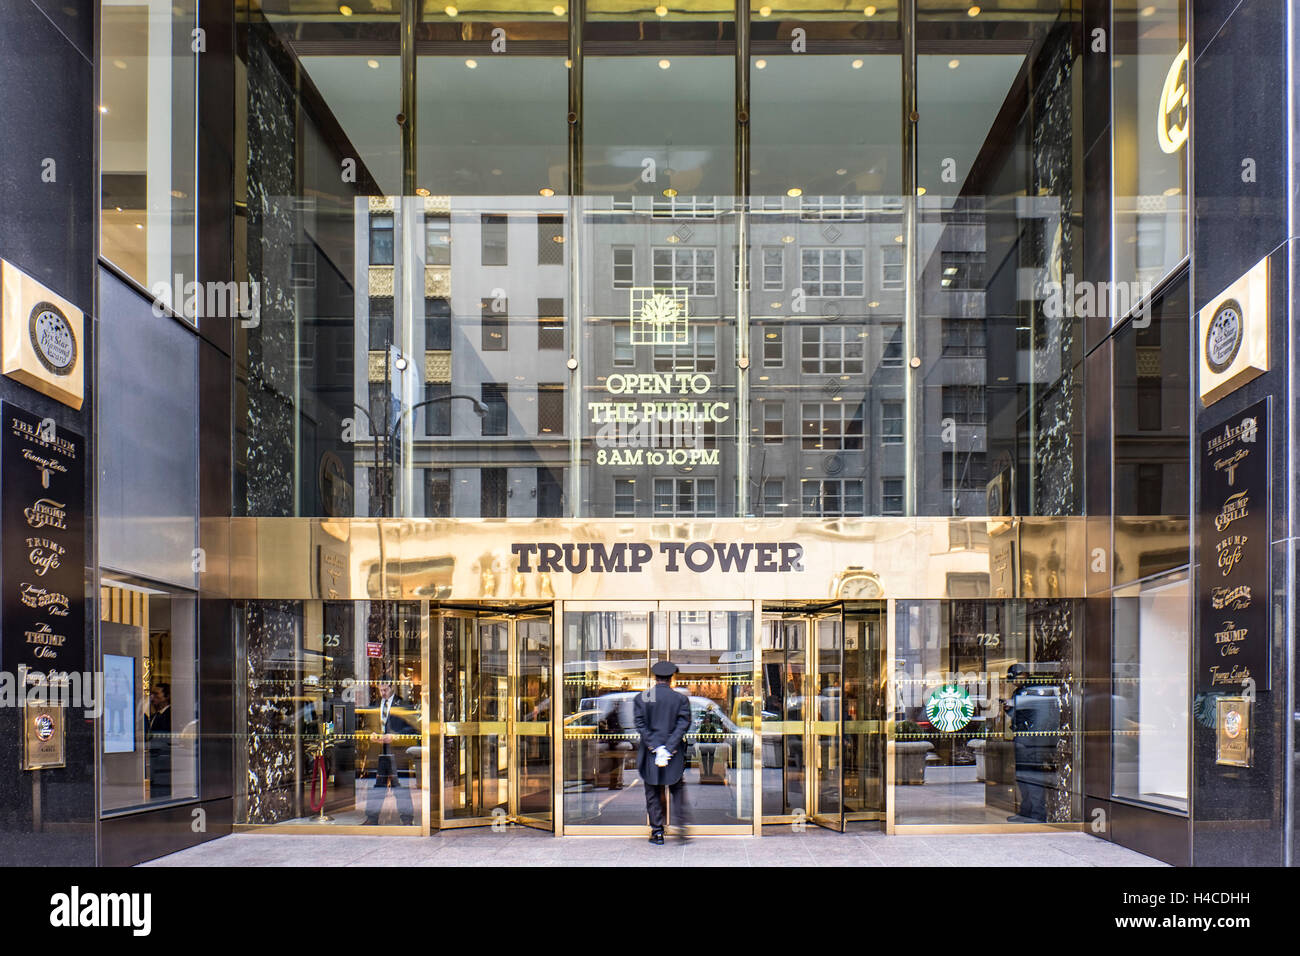 Trump Tower in New York Stock Photo